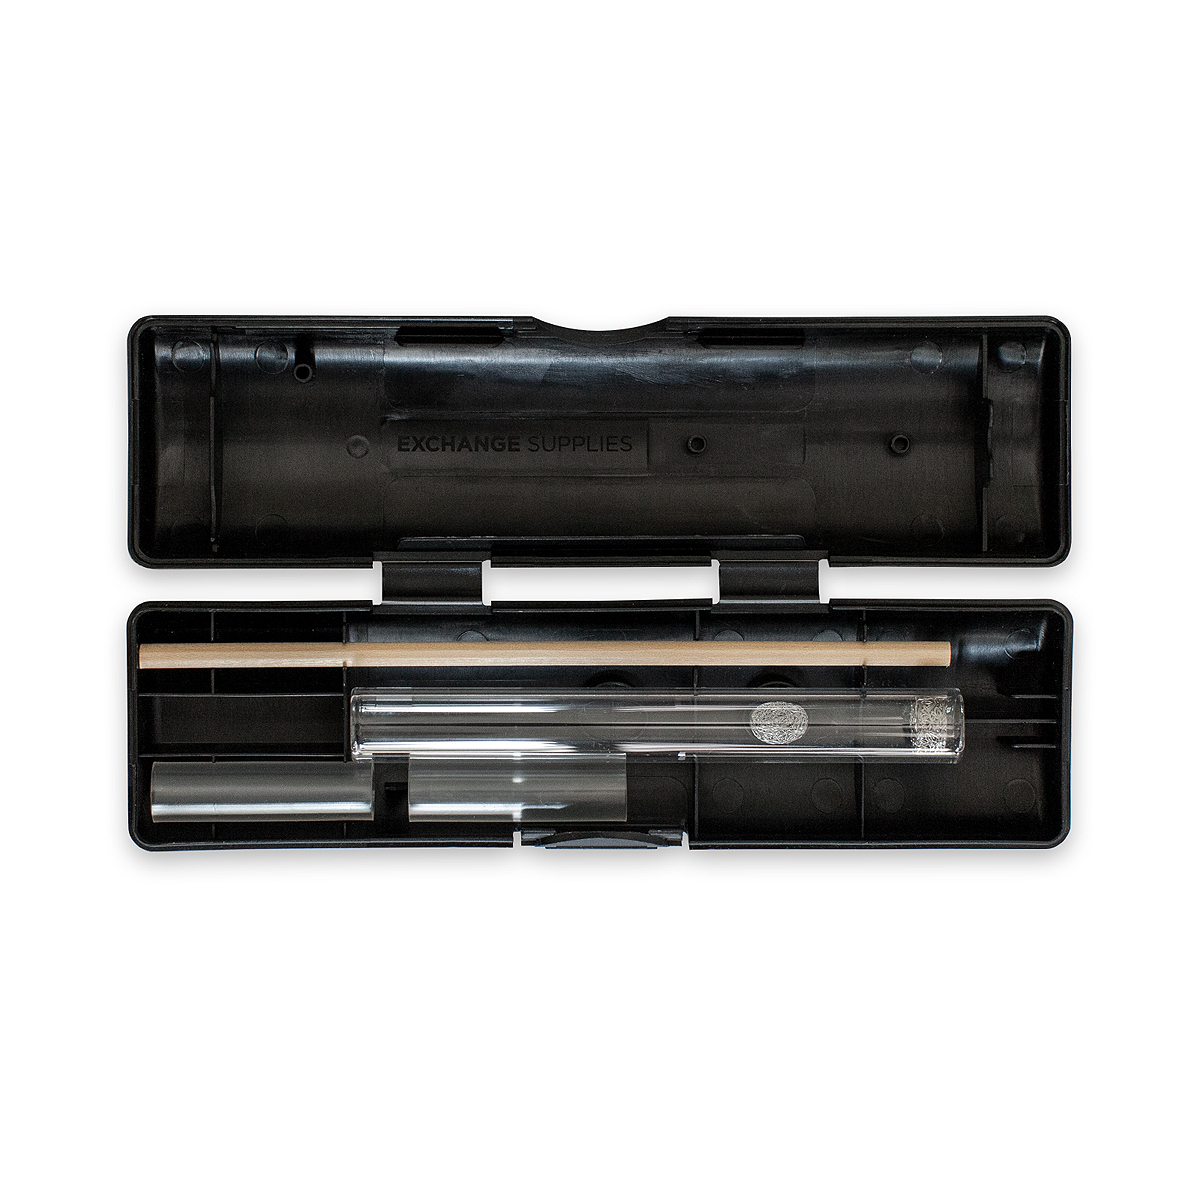 Terpan Long Pipe Kit: 1 Long Straight Pipe, 2 Gauzes, 2 Mouth Pieces  in a Plastic Case